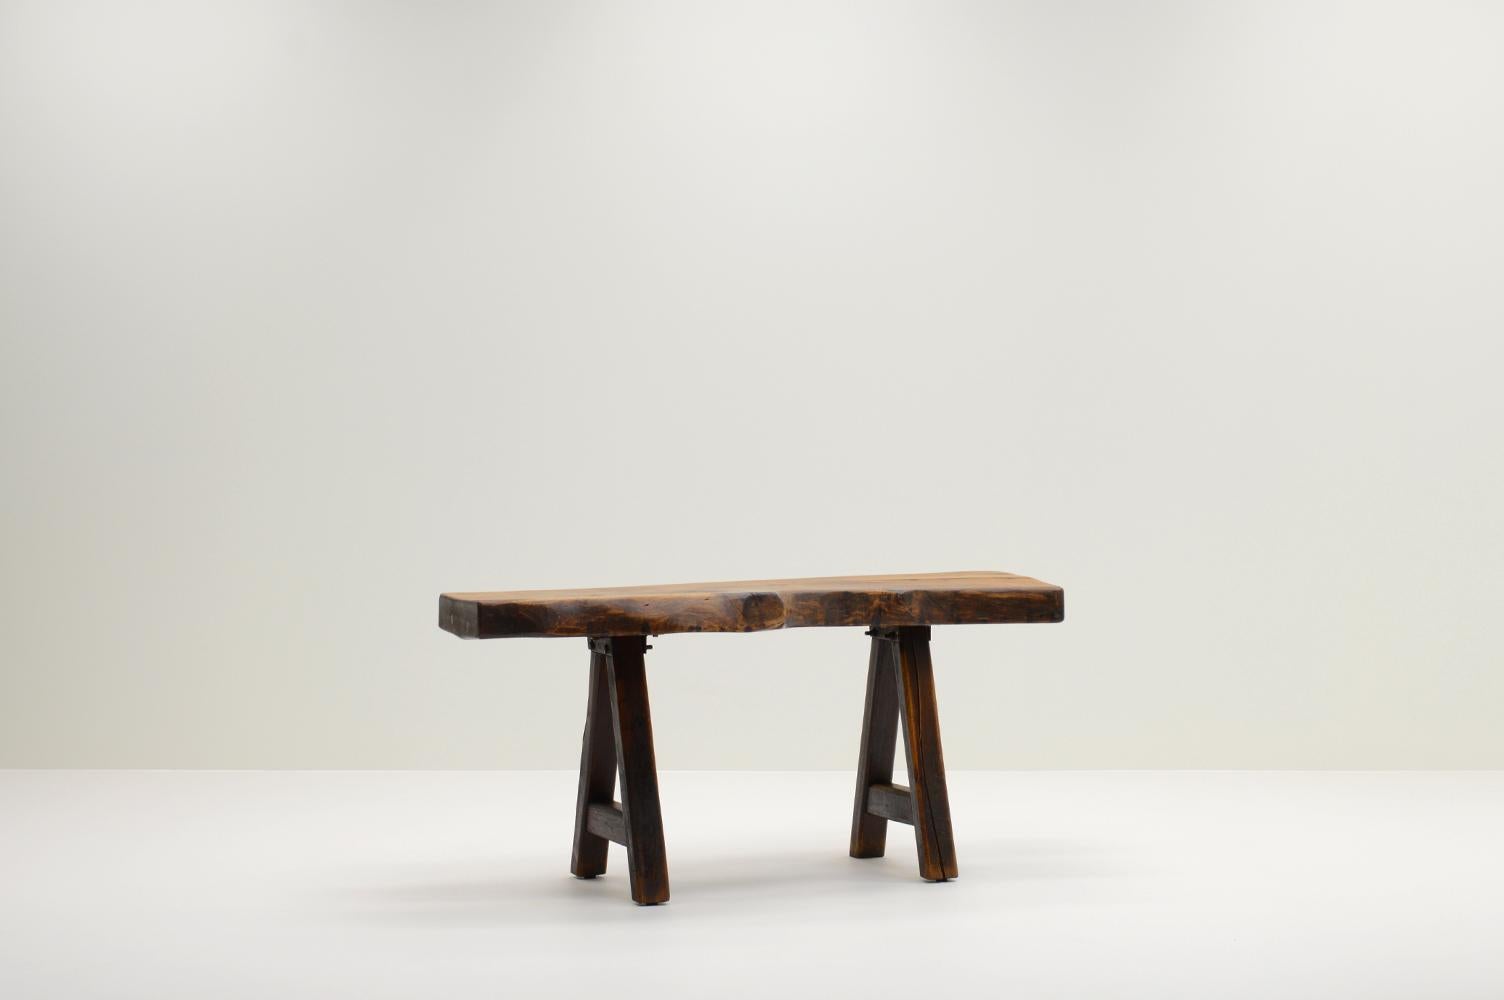 Handmade Oak brutalist table by Mobichalet, Belgium 60s. Thick solid oak tree slab top and solid oak base fixed with metal parts. Mobichalet is known for its rustic organic furniture. Becouse of the size the table can be used for several purposes.